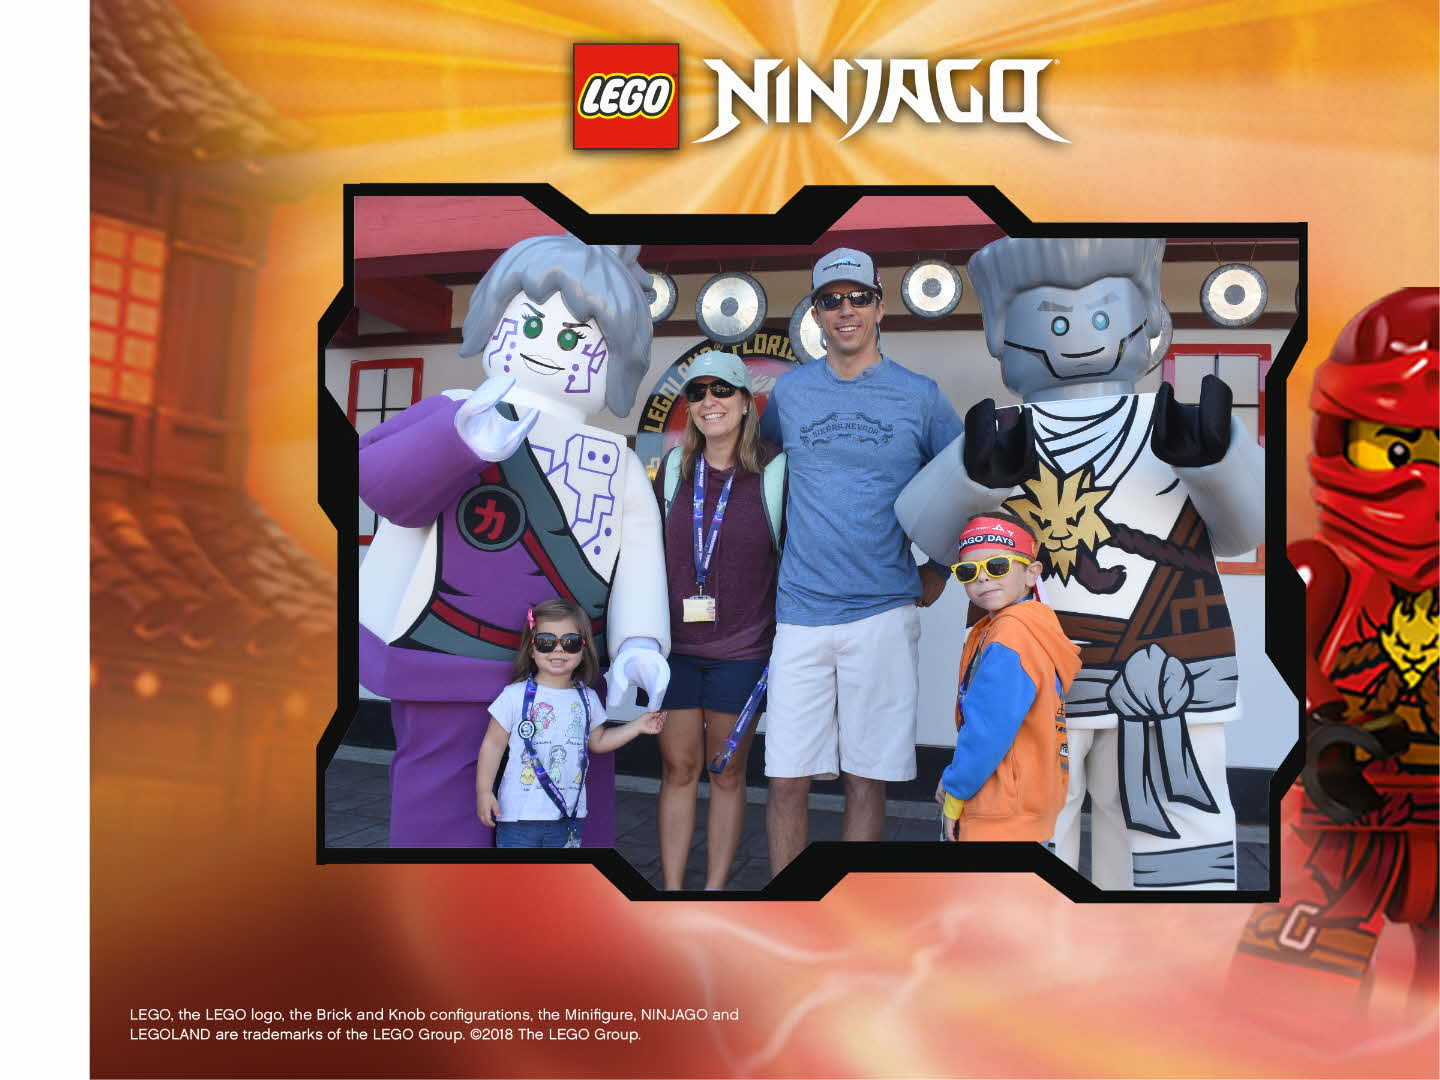 Ninjago Character Meet & Greets with two adults, and two kids.
